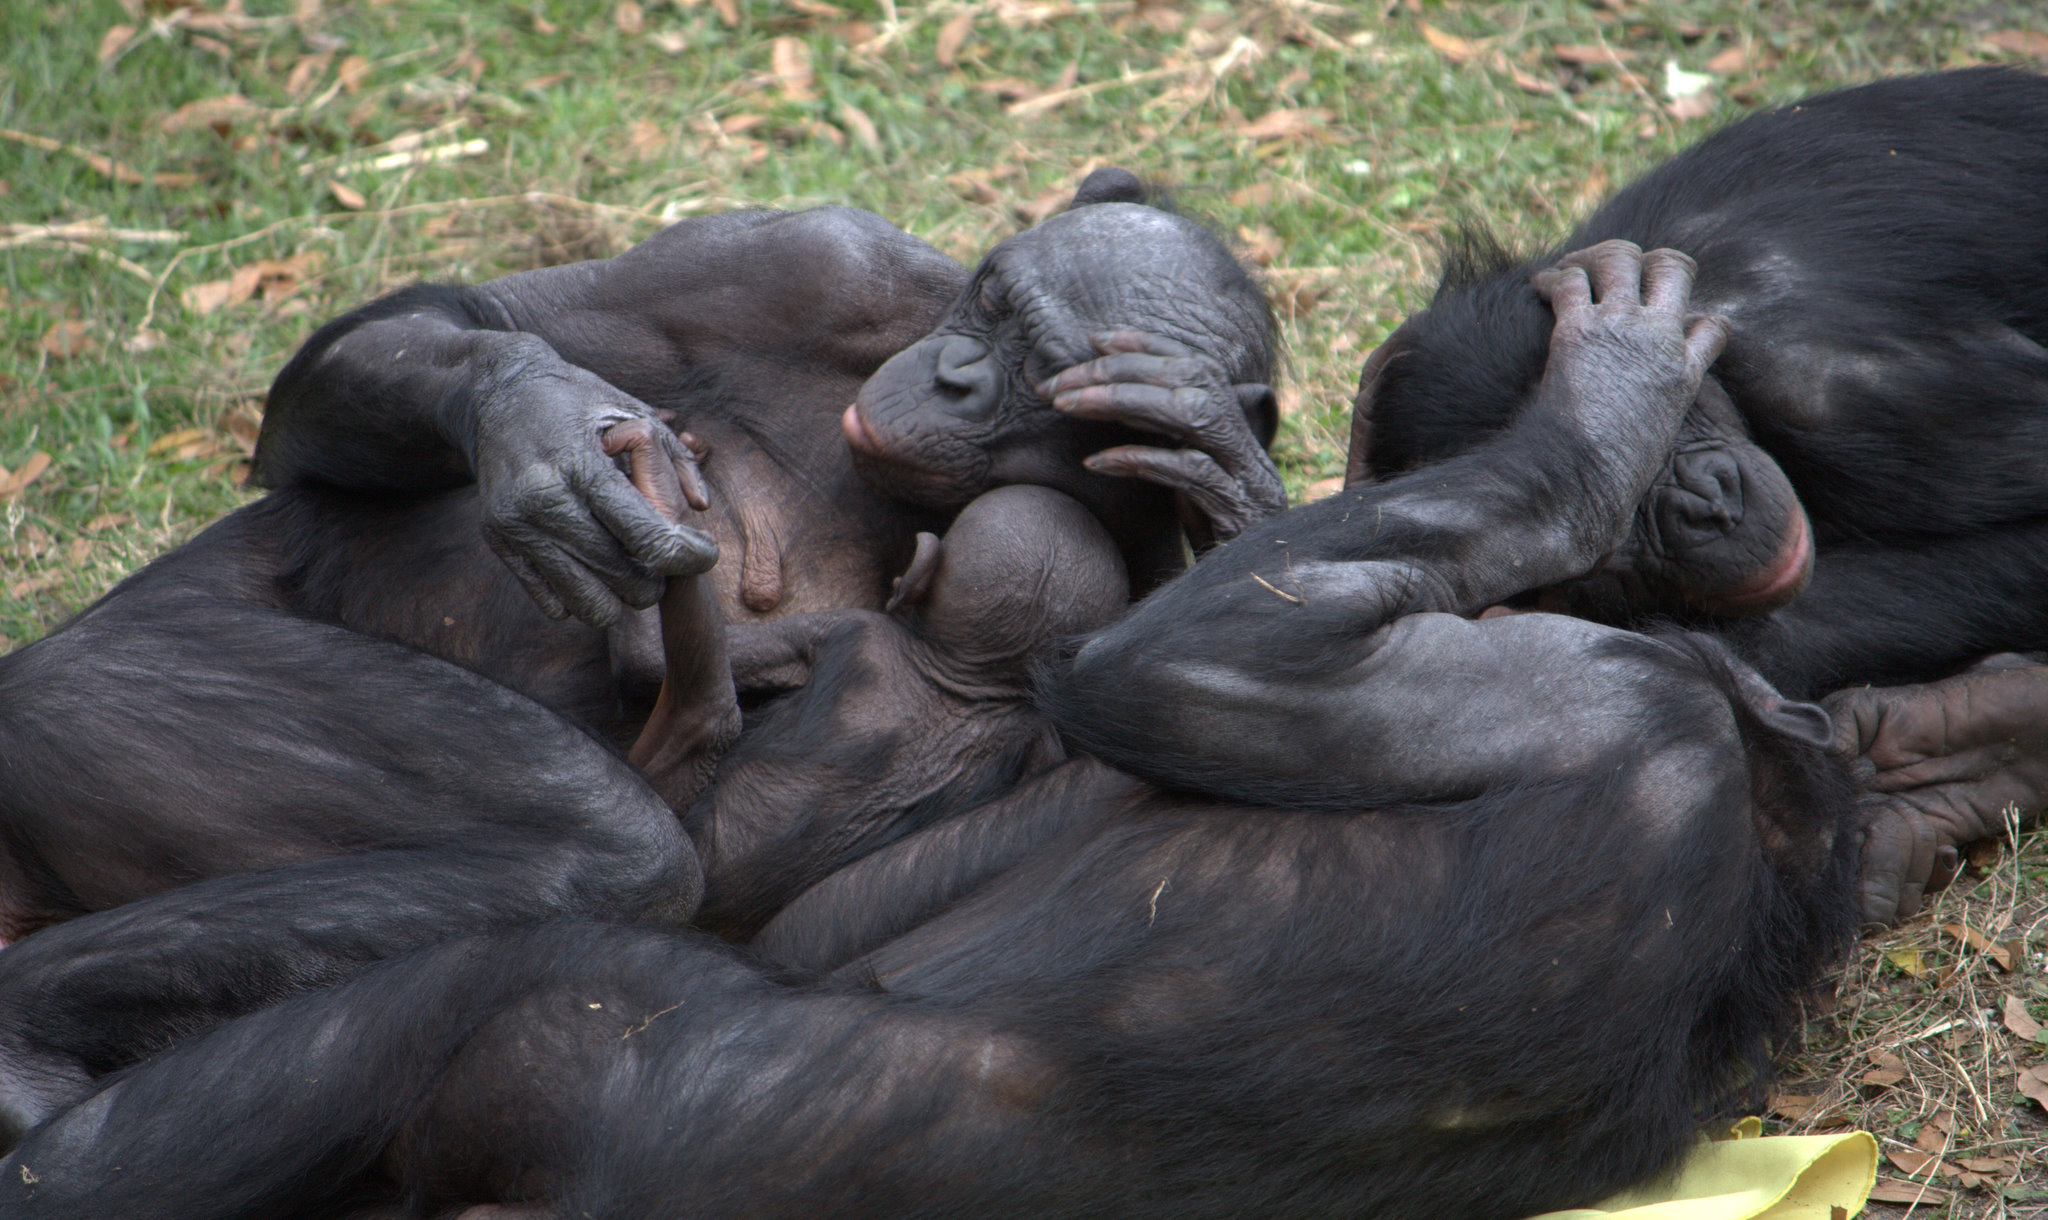 Apes comfort with hugs